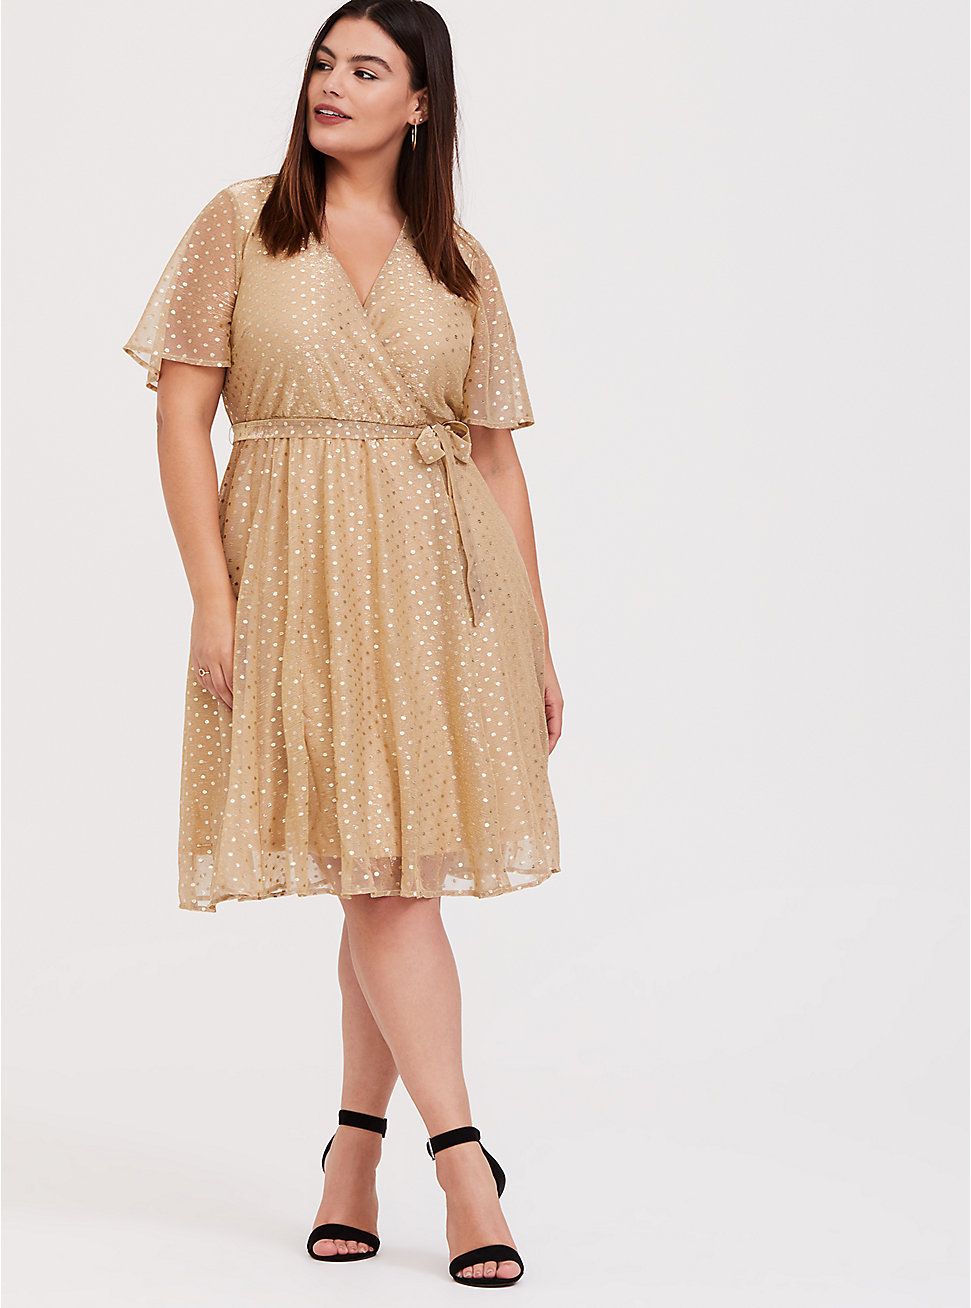 Plus Size NYE Party Outfits for 2021